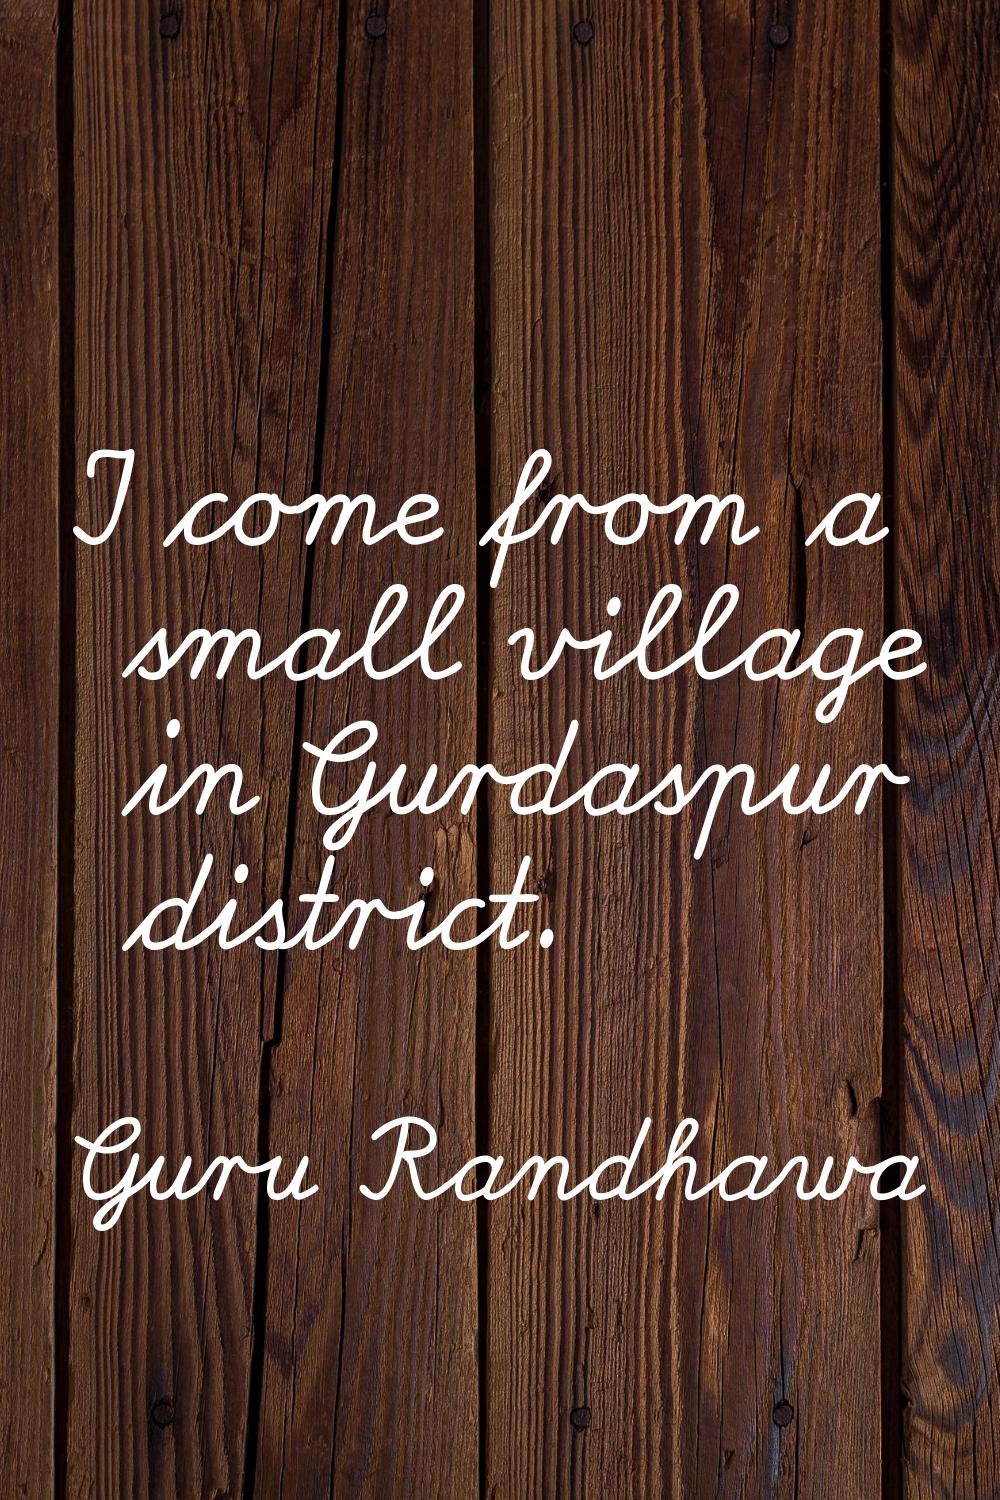 I come from a small village in Gurdaspur district.